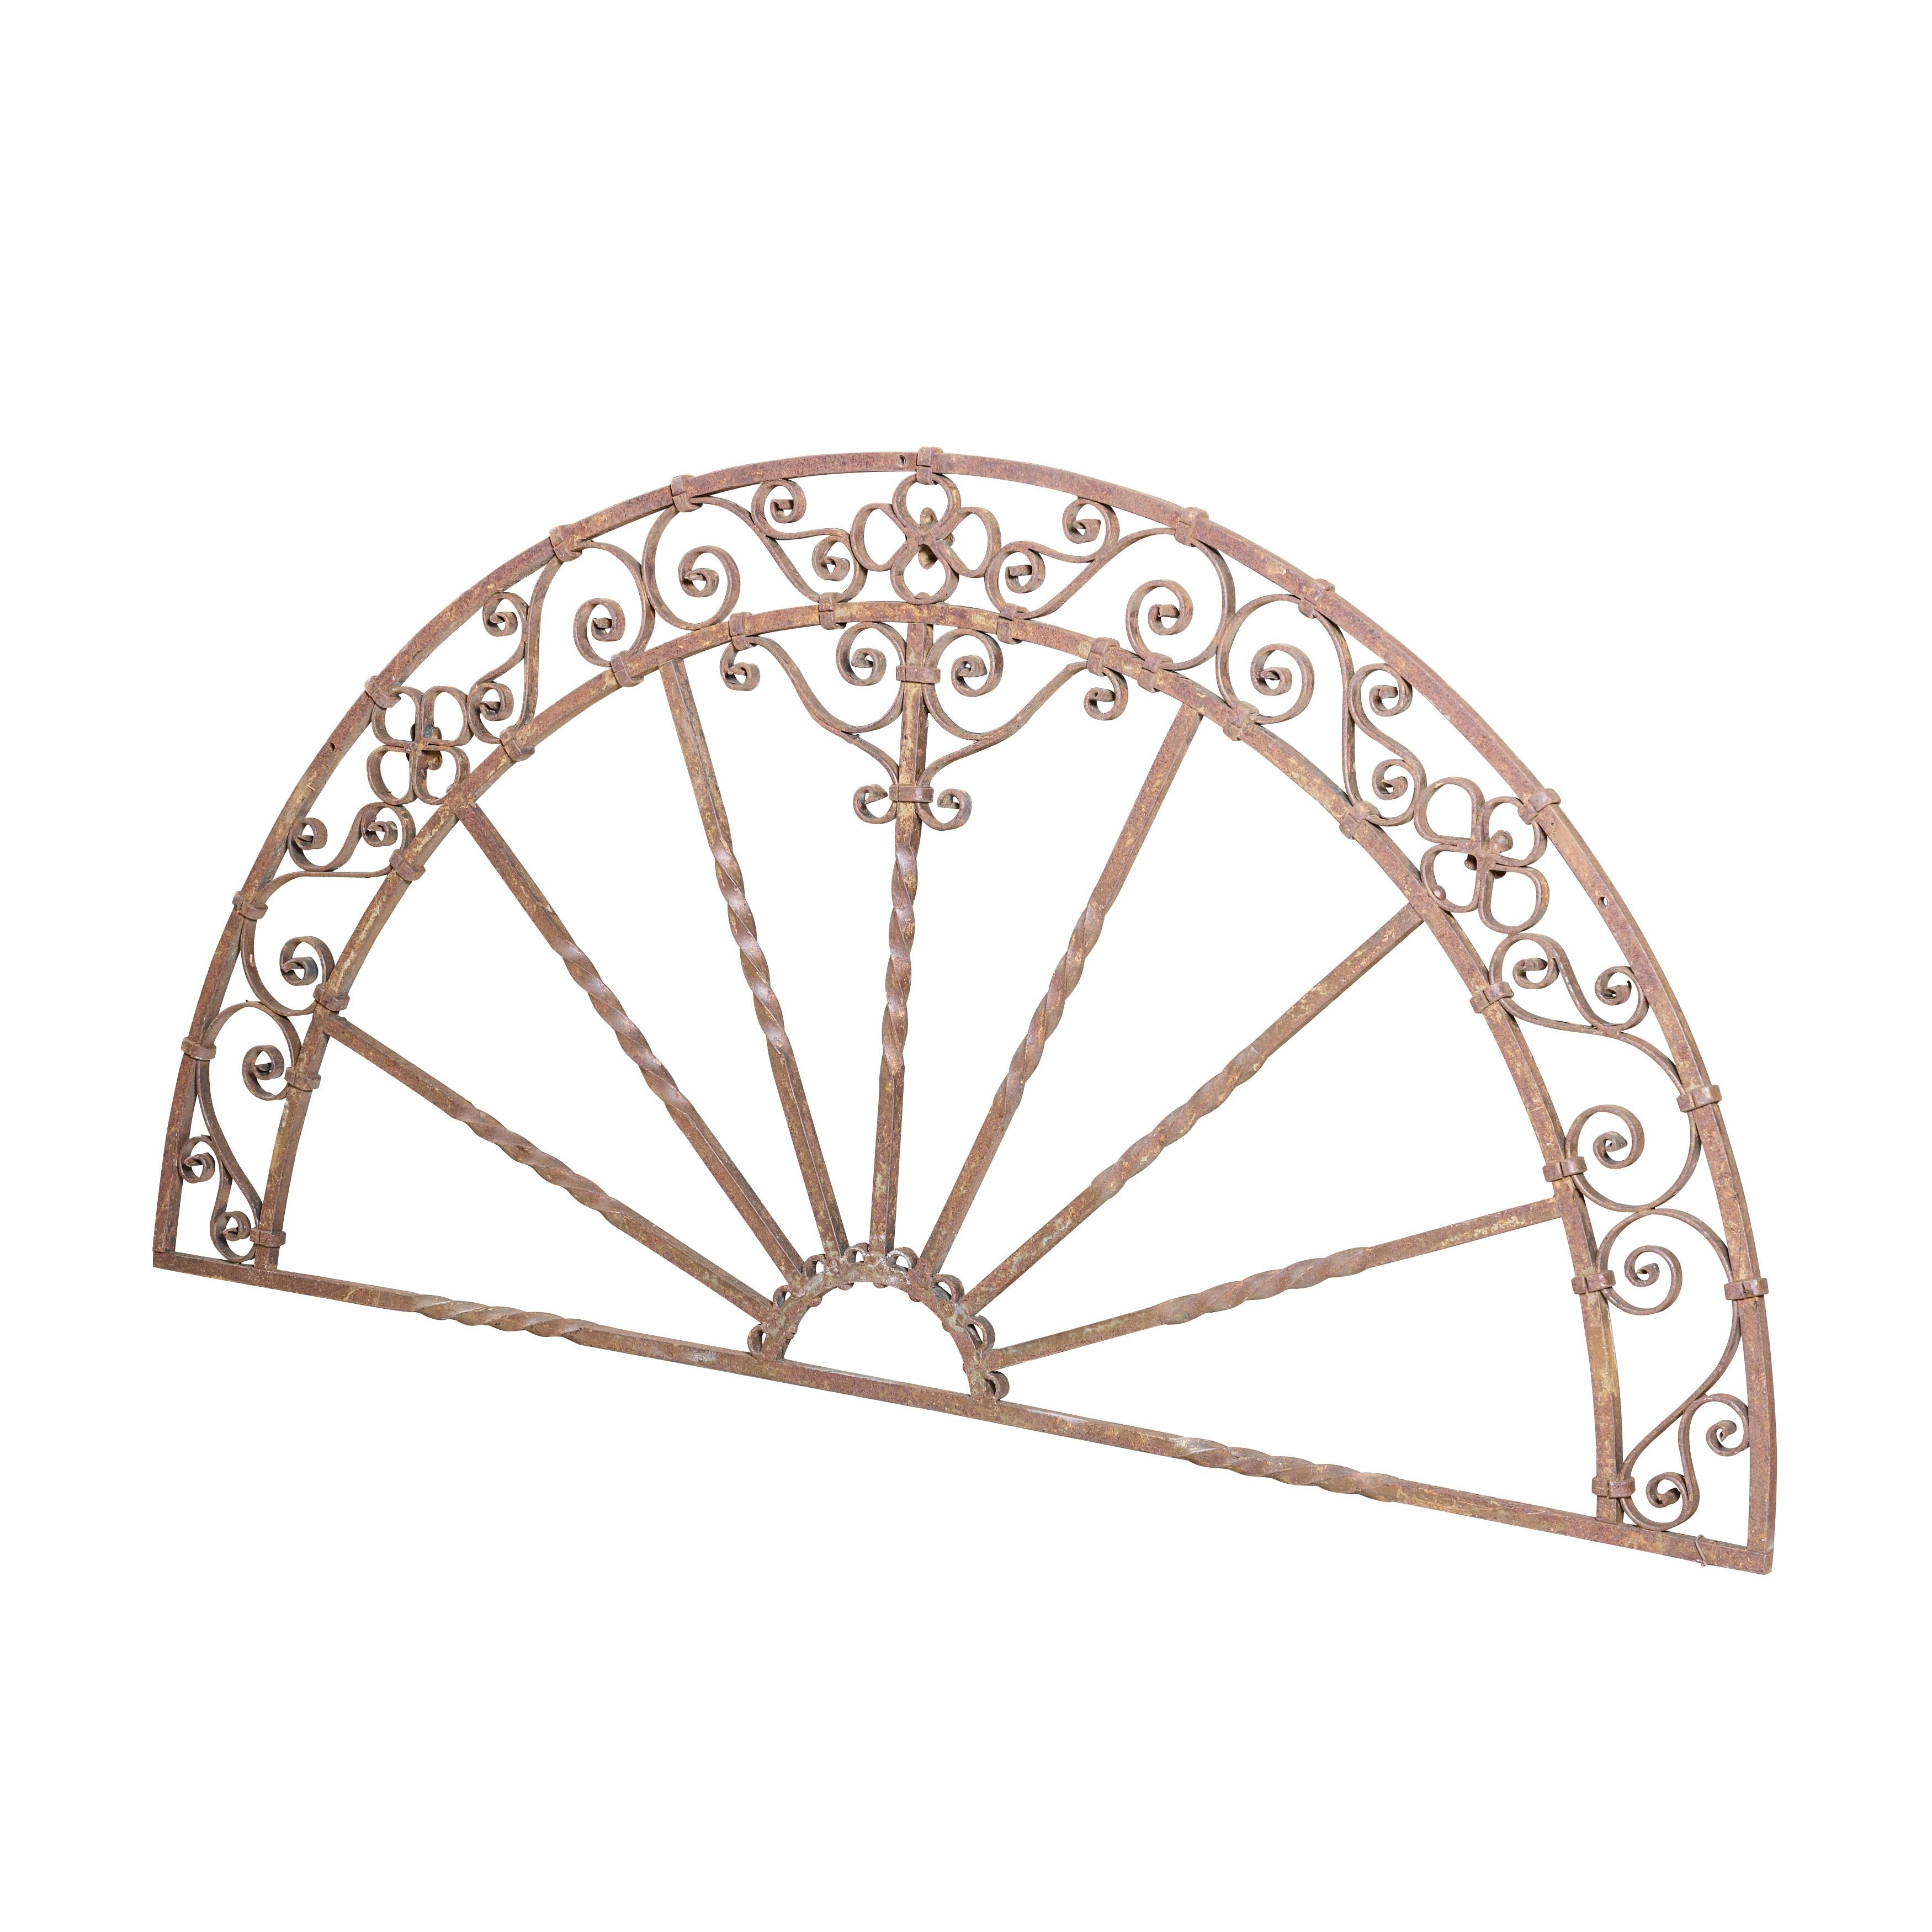 Decorative wrought iron grill.

 